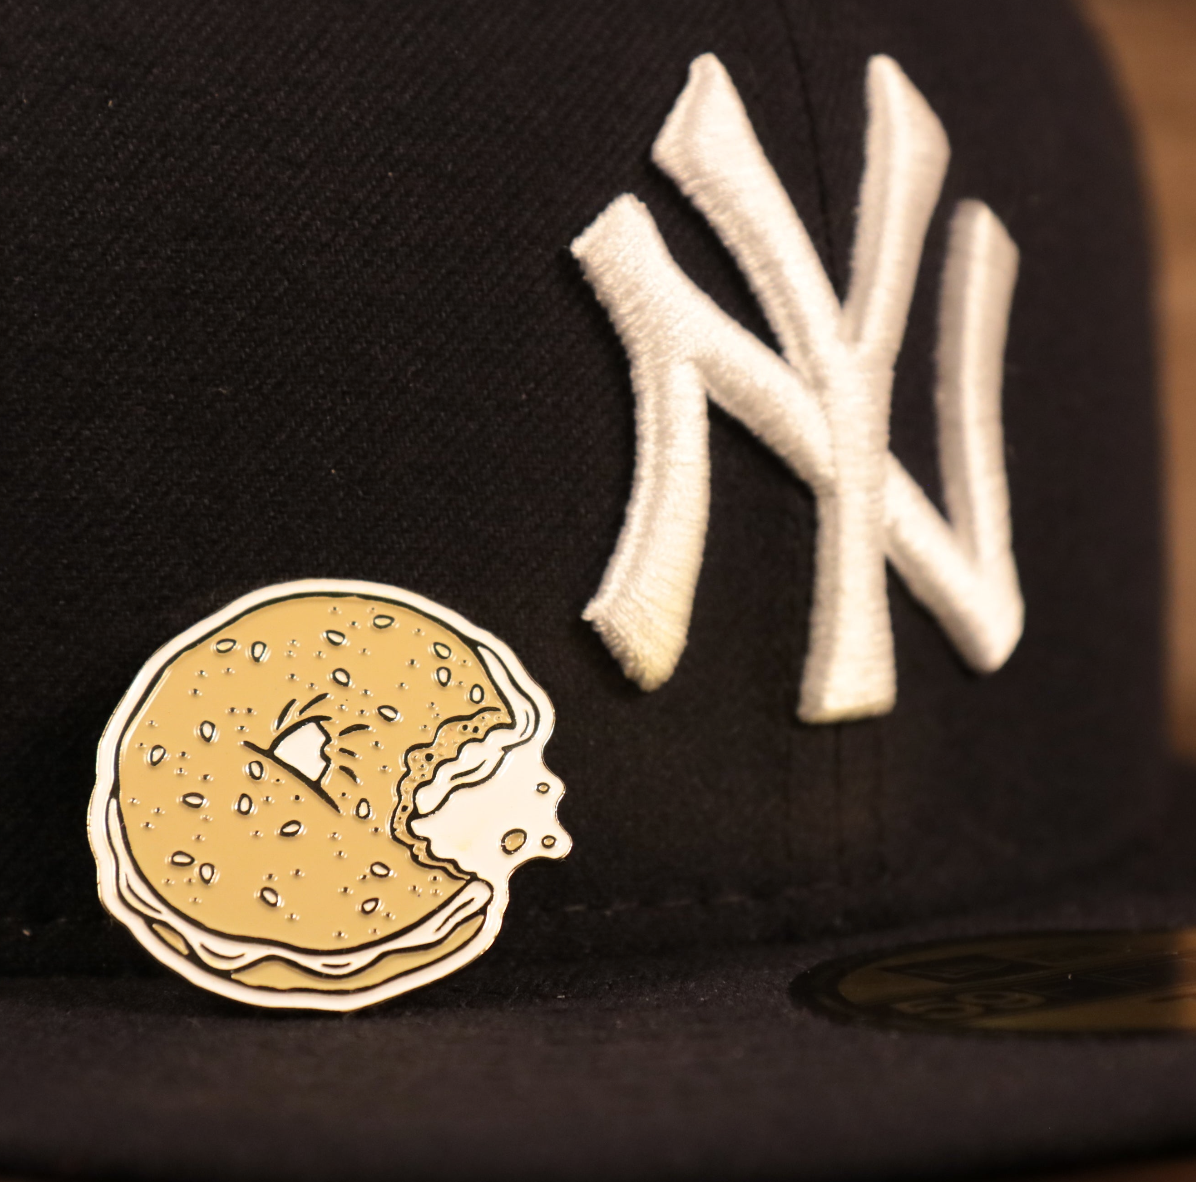 The New York Bagel Fitted Cap Pin | Enamel Pin For Hat on the brim